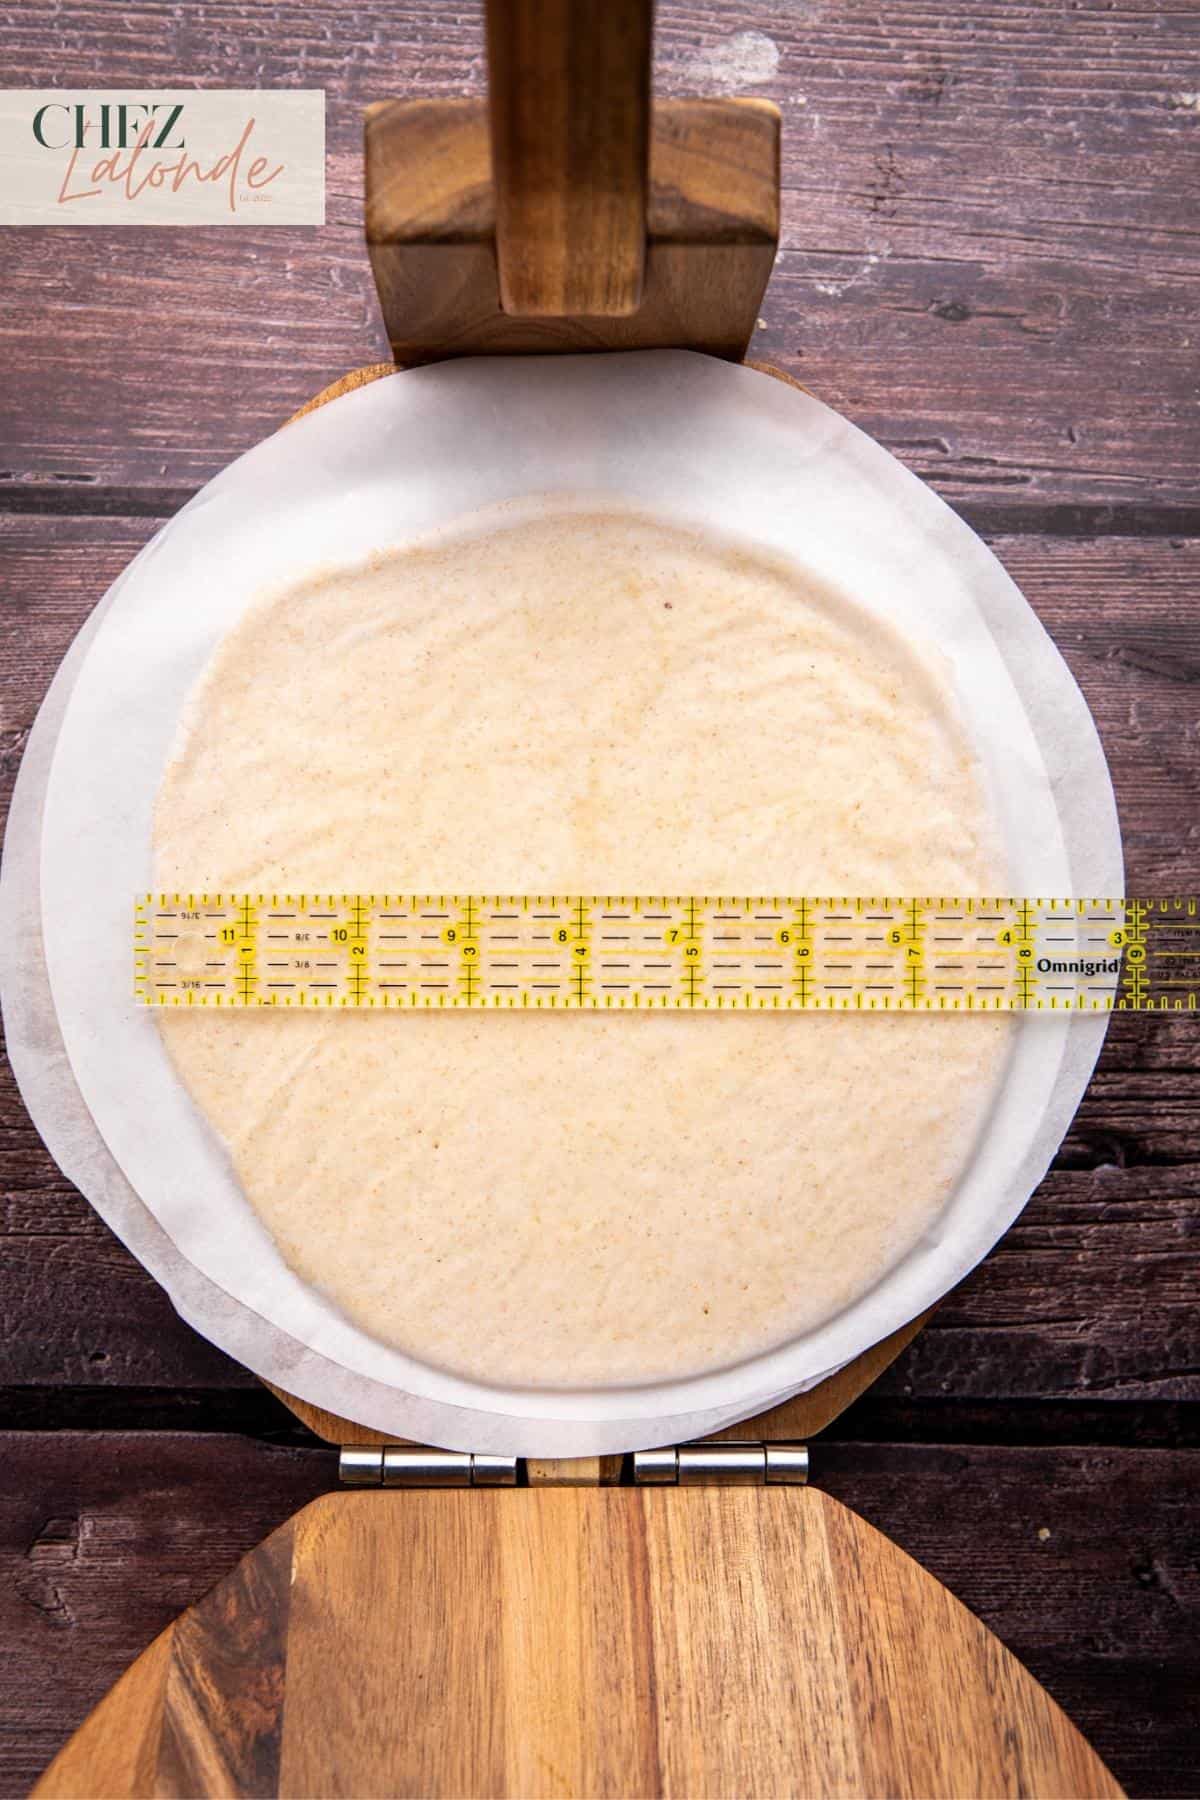 Using a ruler to make sure the size is right.  Here in the picture this pita is measured at 8 inches in diameter. 